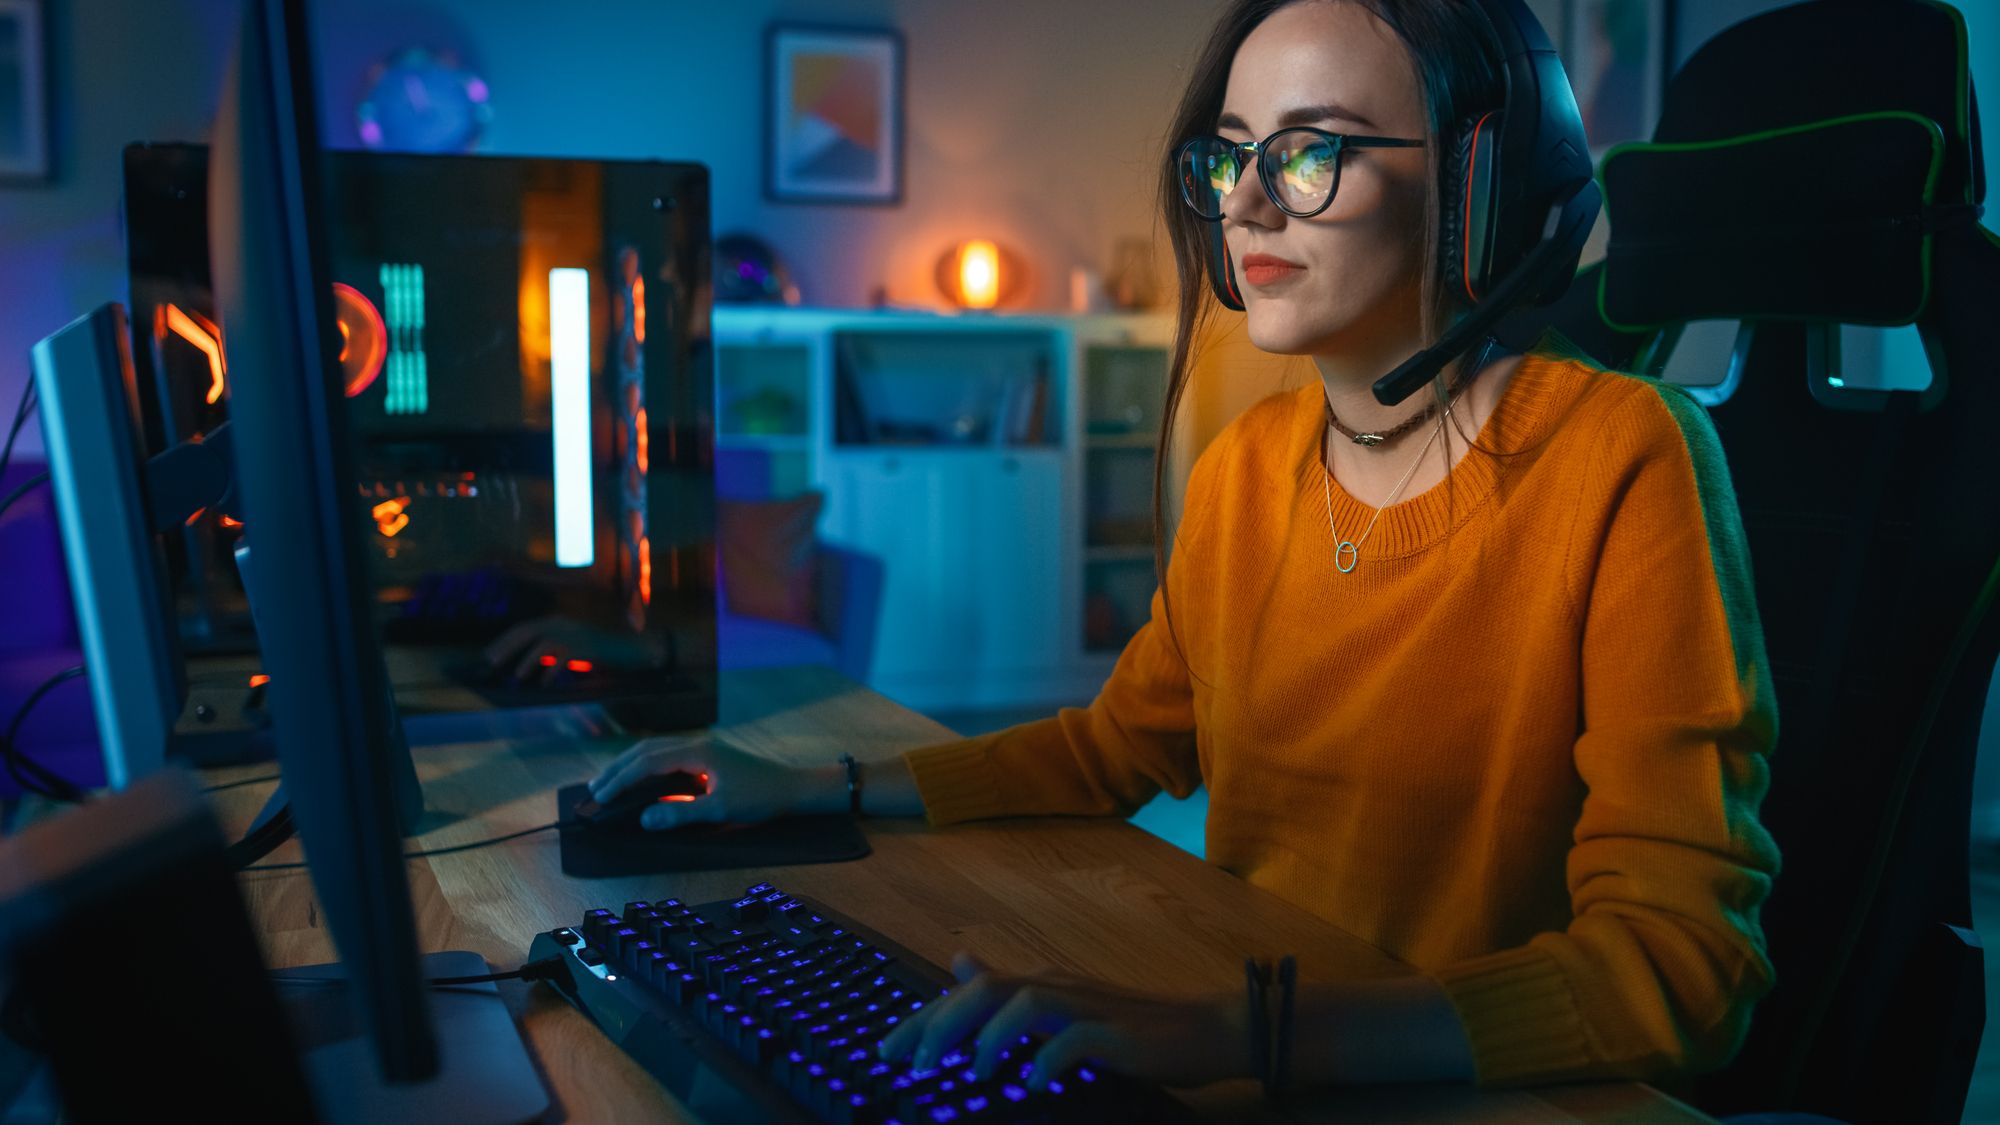 How Toxic Gaming Culture Has Discouraged Female Gamers